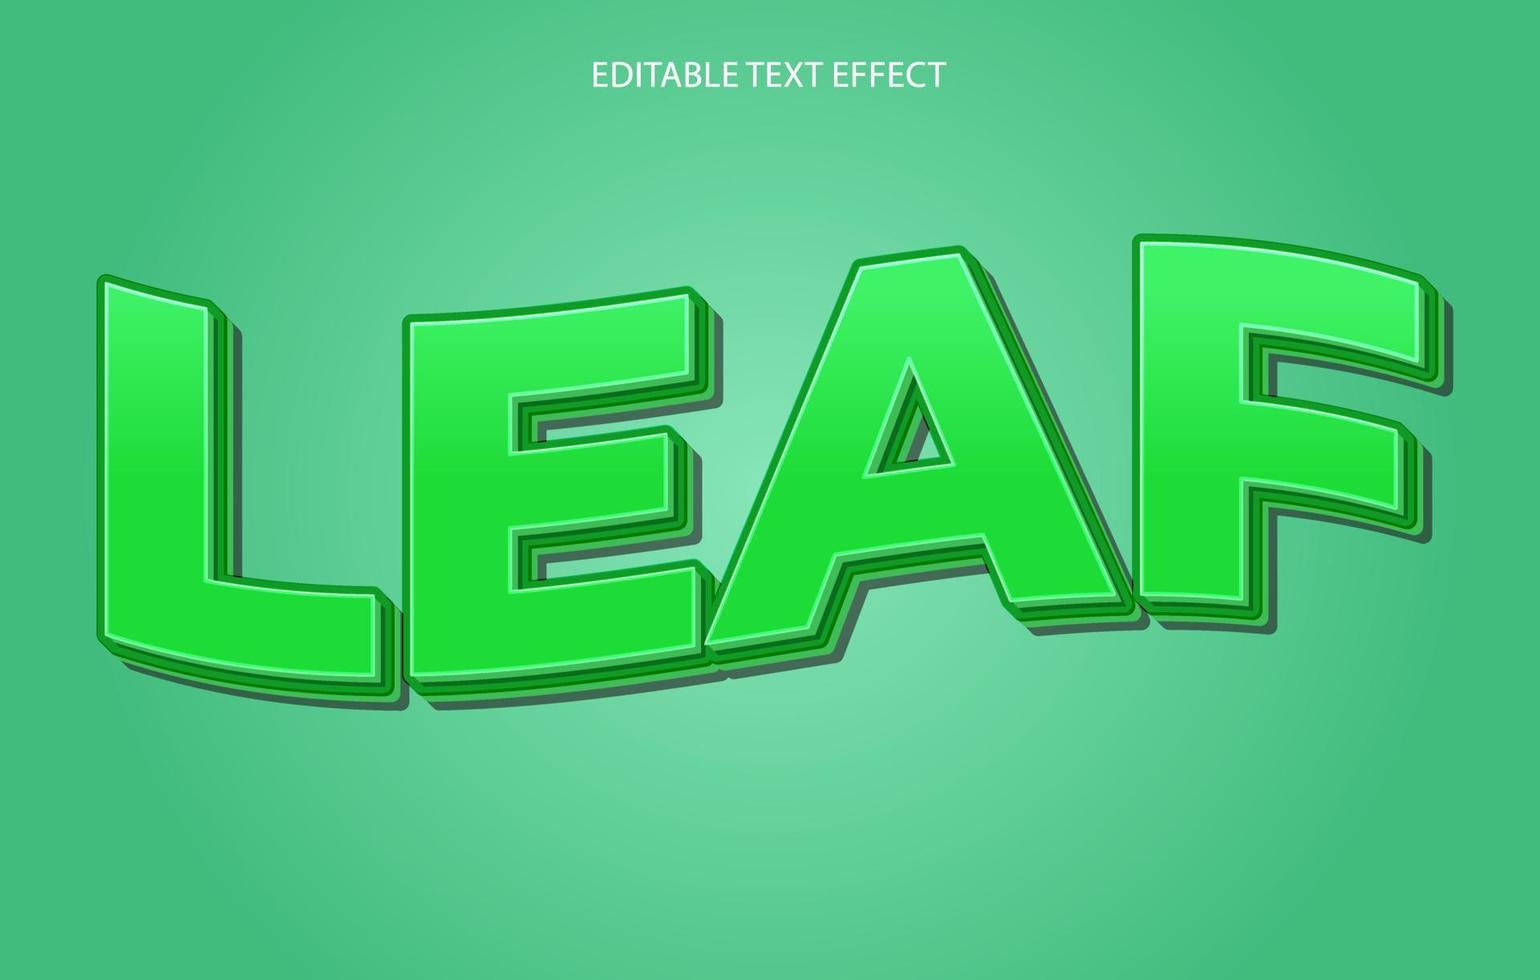 Editable 3d text effect, text effect style, Leaf editable text effect template vector